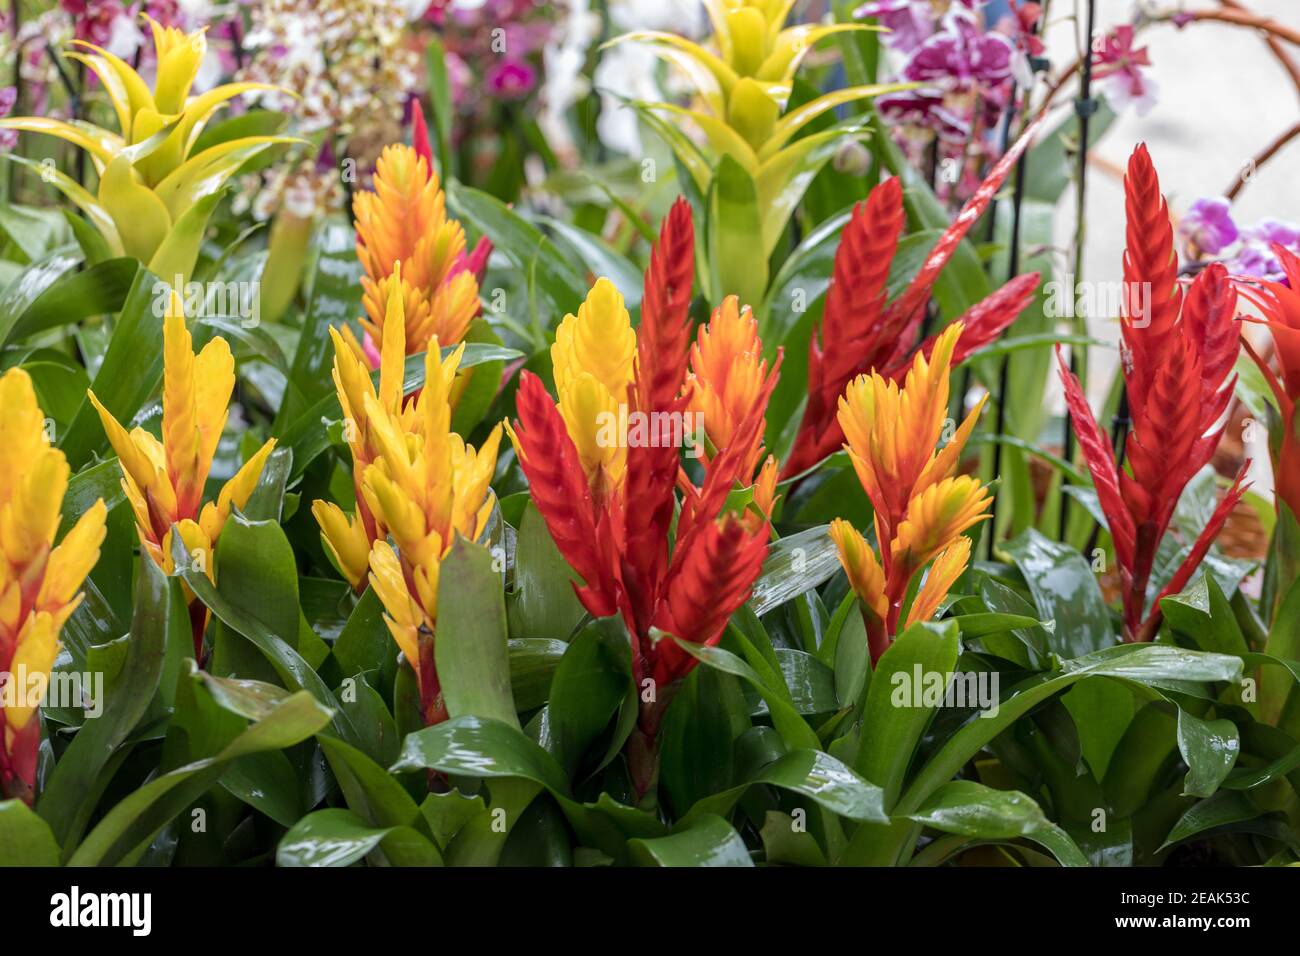 Vriesea (Vriesea Bromeliaceae) is a tropical ornamental plant with exotic flowers of various colors. Stock Photo